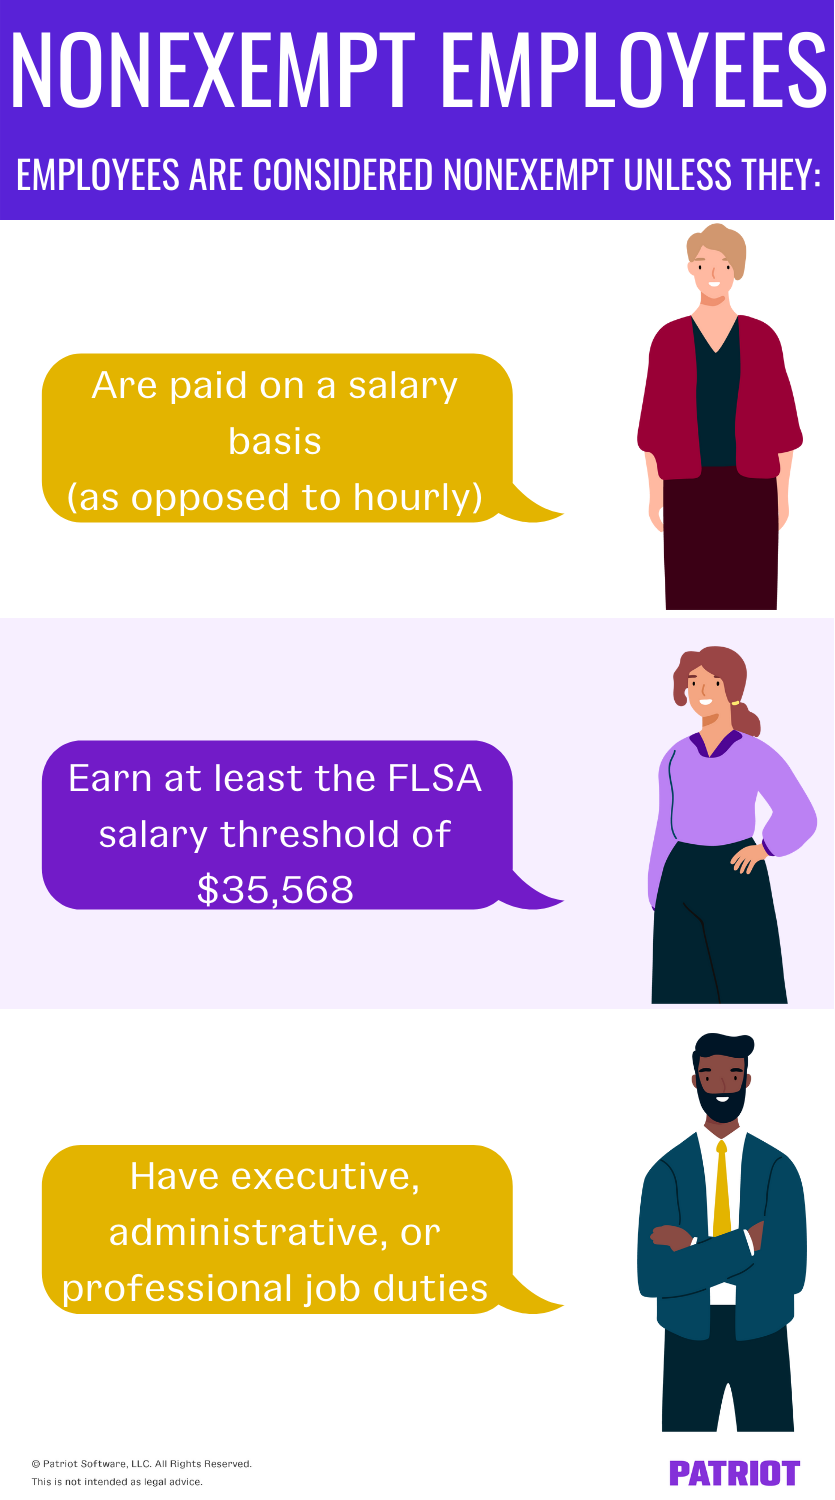 Employees are considered nonexempt unless they: Are paid on a salary basis, earn at least the FLSA salary threshold of $25,568, AND have executive, administrative, or professional job duties 